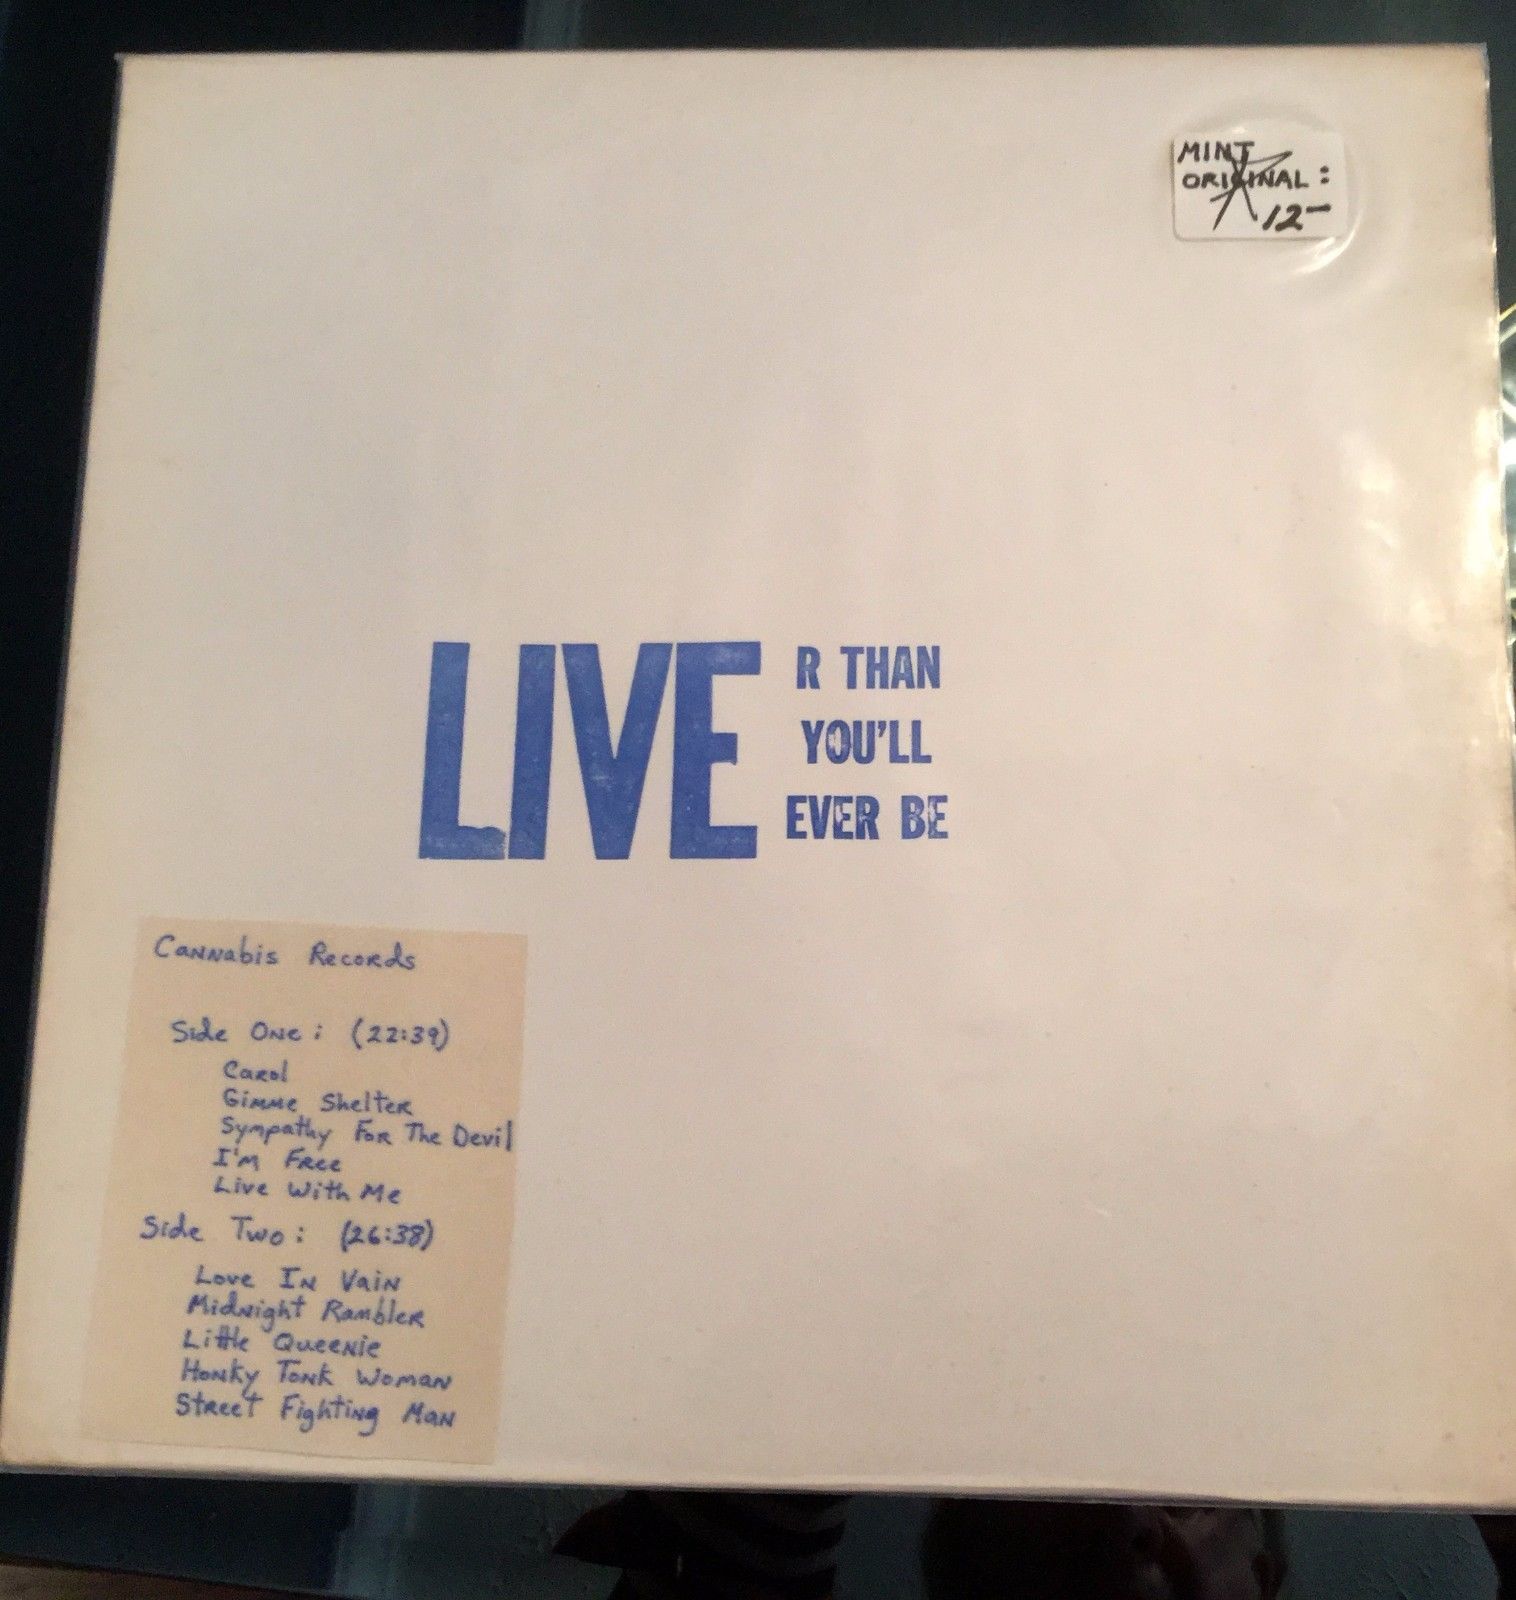 popsike.com - ROLLING STONES LIVE R THAN YOU'LL EVER BE VINYL LP